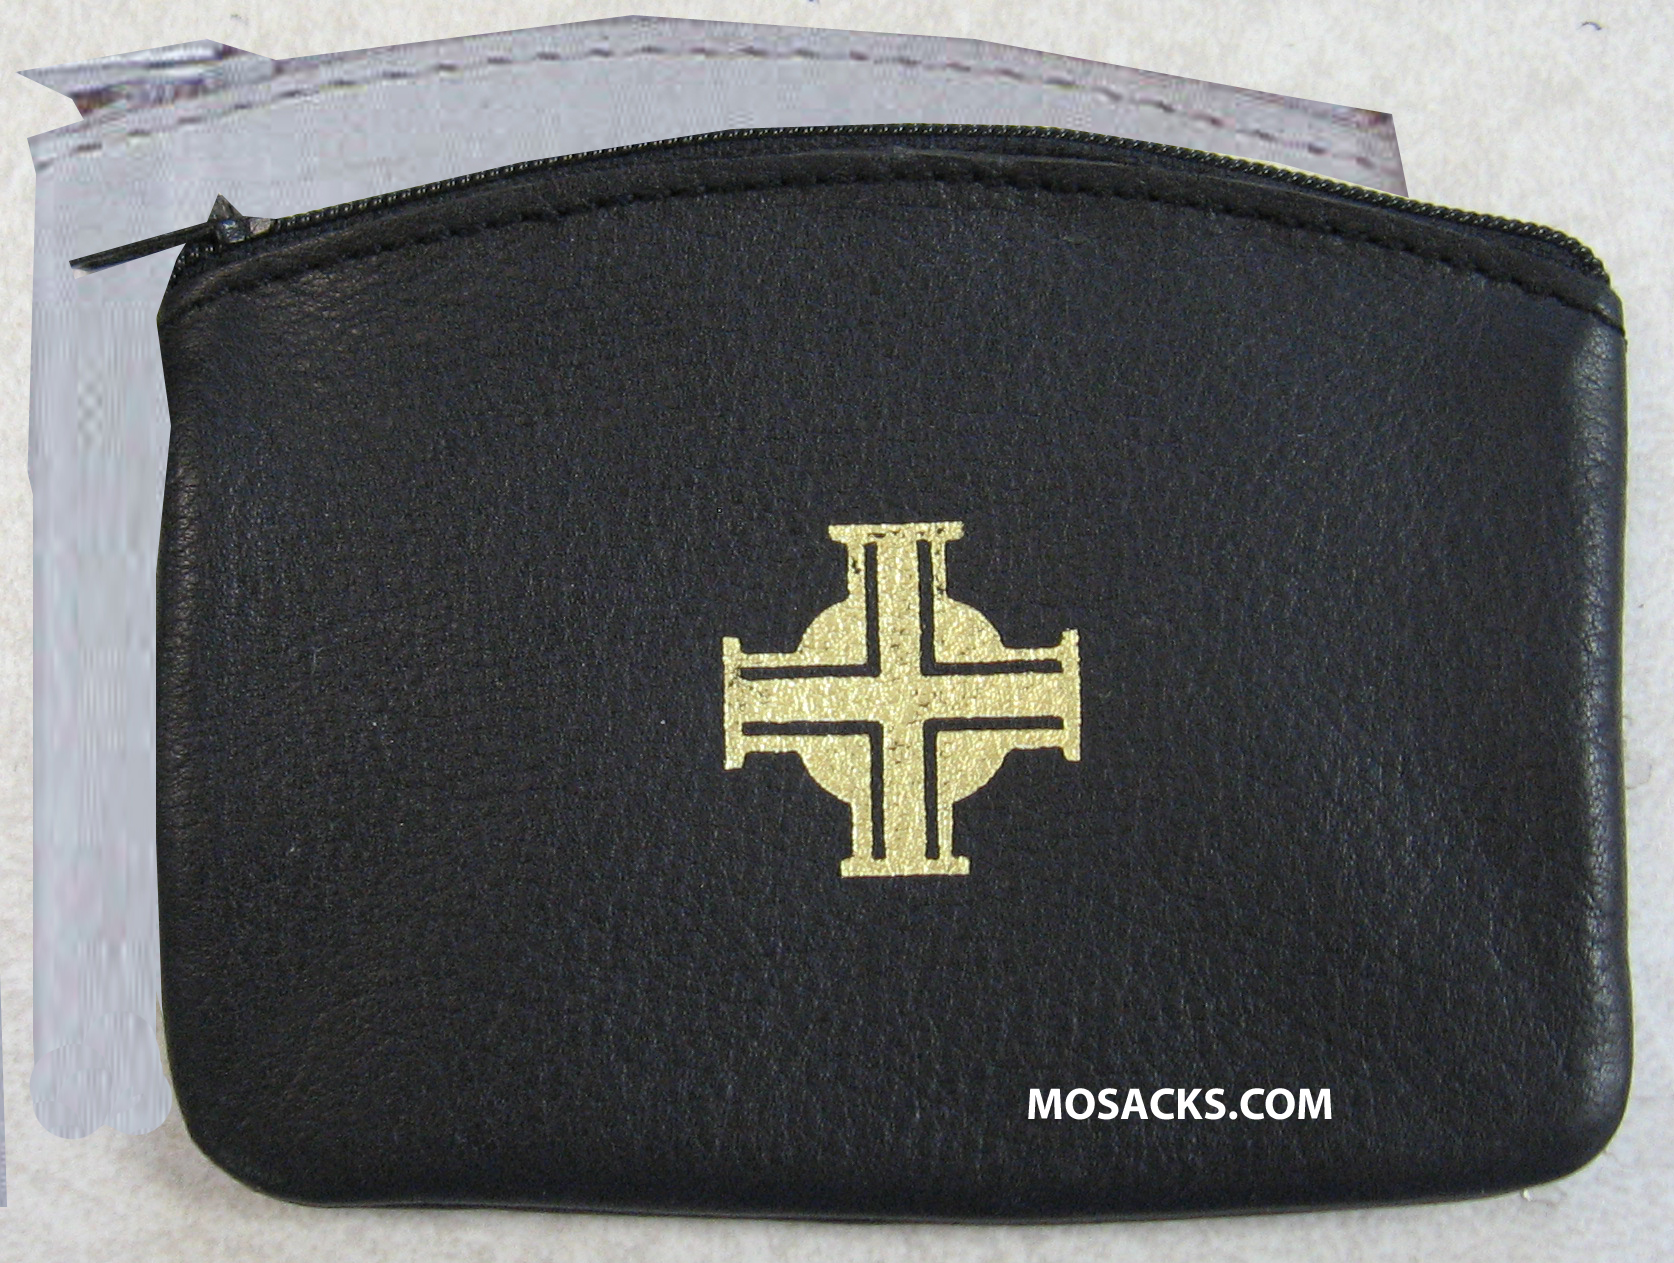 Rosary Case Black Leather With Gold Cross Zipper 64-7600BK